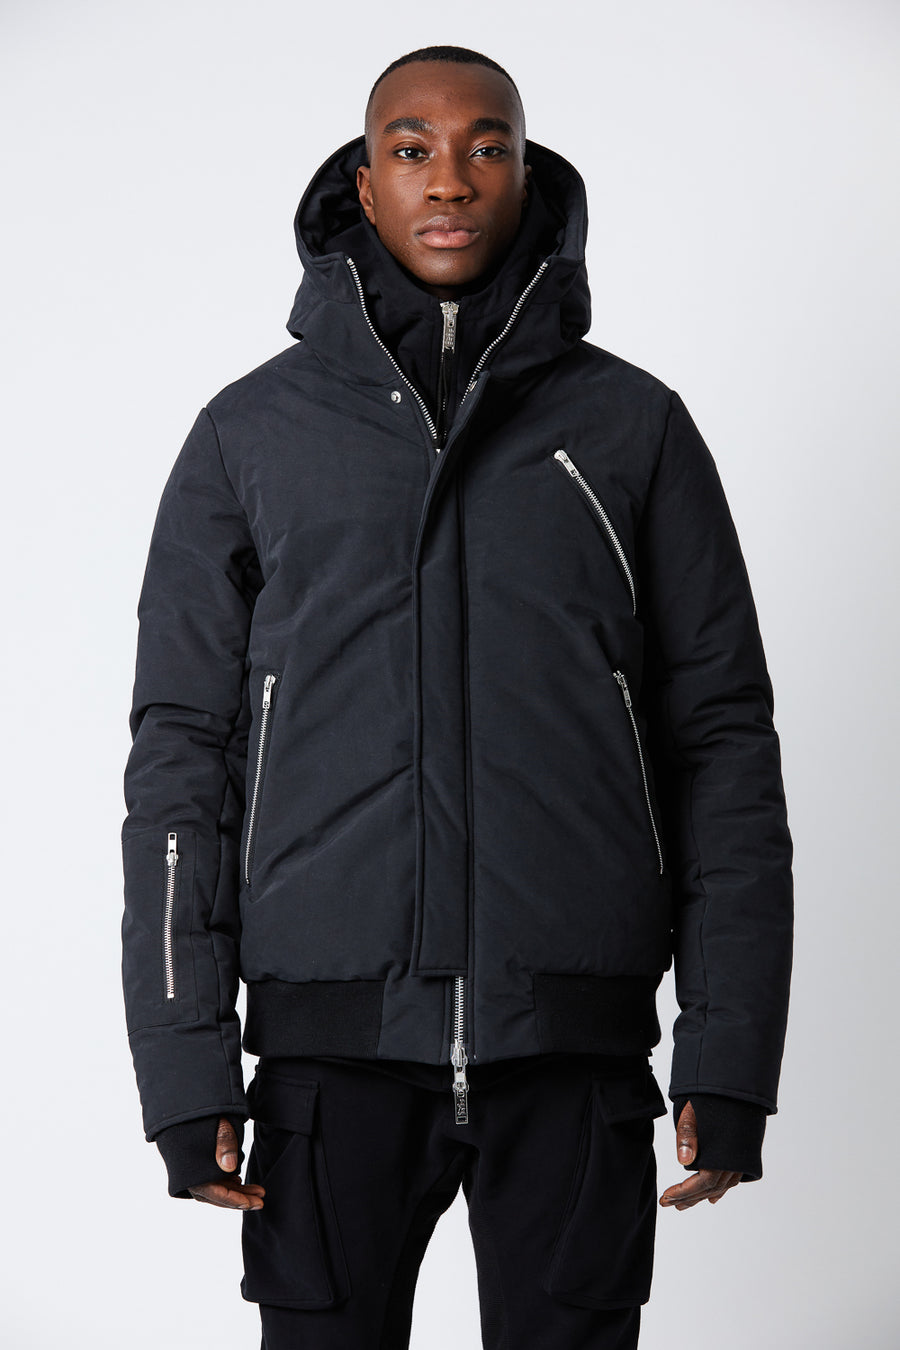 Buy the Thom Krom M J 59 Jacket in Black at Intro. Spend £50 for free UK delivery. Official stockists. We ship worldwide.